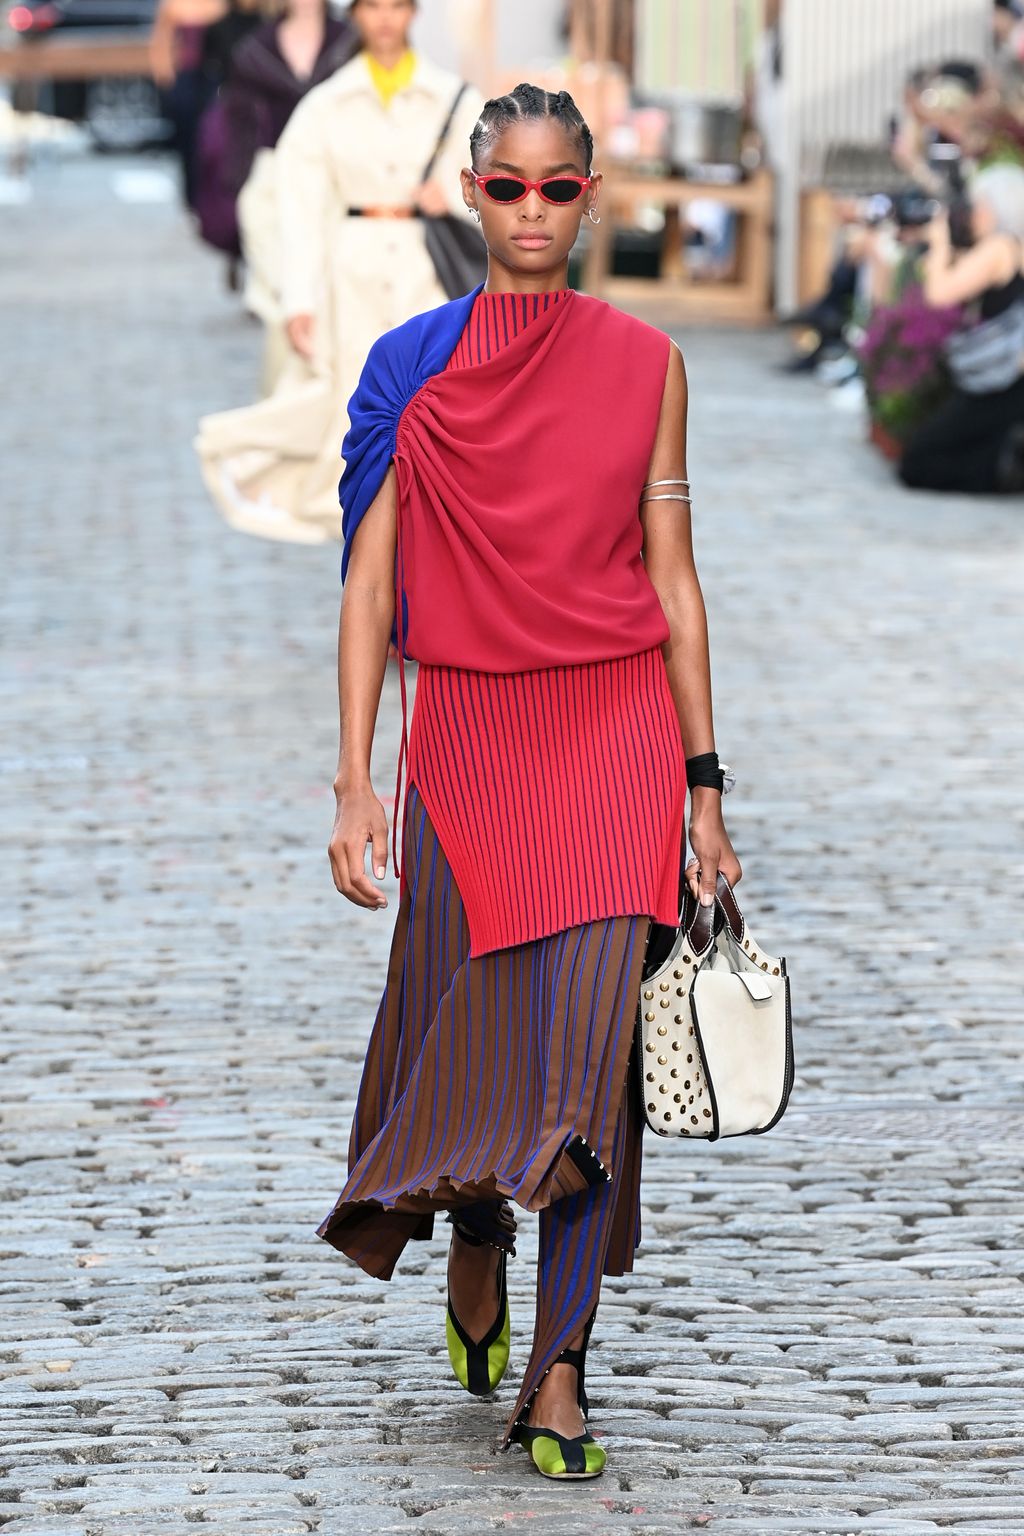 NEW YORK, NEW YORK - SEPTEMBER 12: A model walks the runway during the Tory Burch Spring/Summer 2022 Collection & Mercer Street Block Party on September 12, 2021 in New York City. (Photo by Slaven Vlasic/Getty Images for Tory Burch)